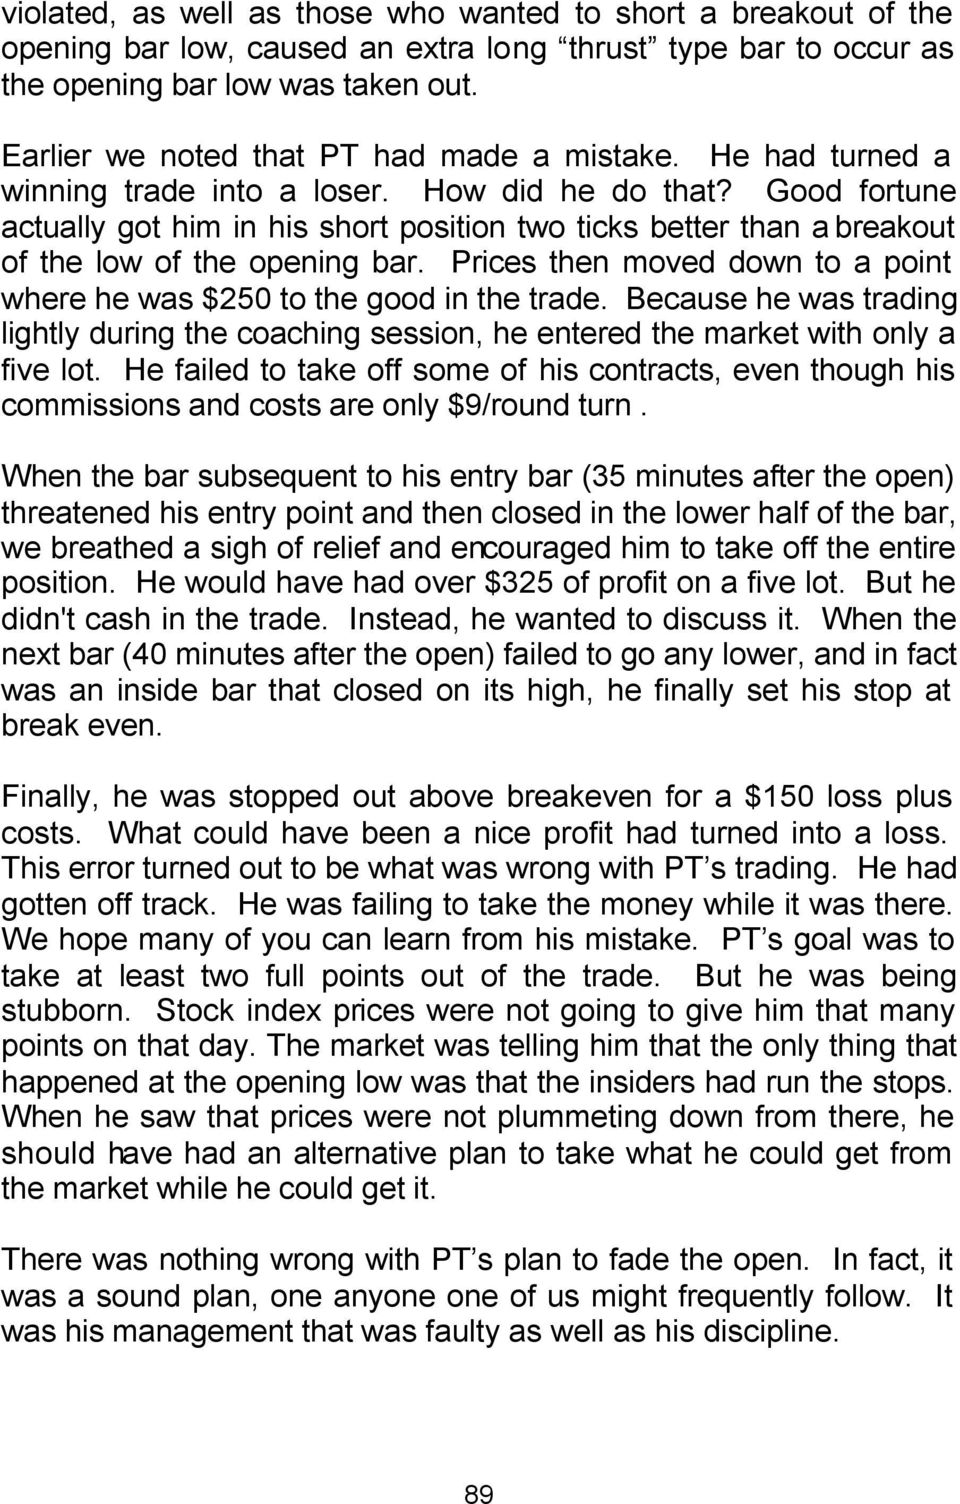 Good fortune actually got him in his short position two ticks better than a breakout of the low of the opening bar. Prices then moved down to a point where he was $250 to the good in the trade.